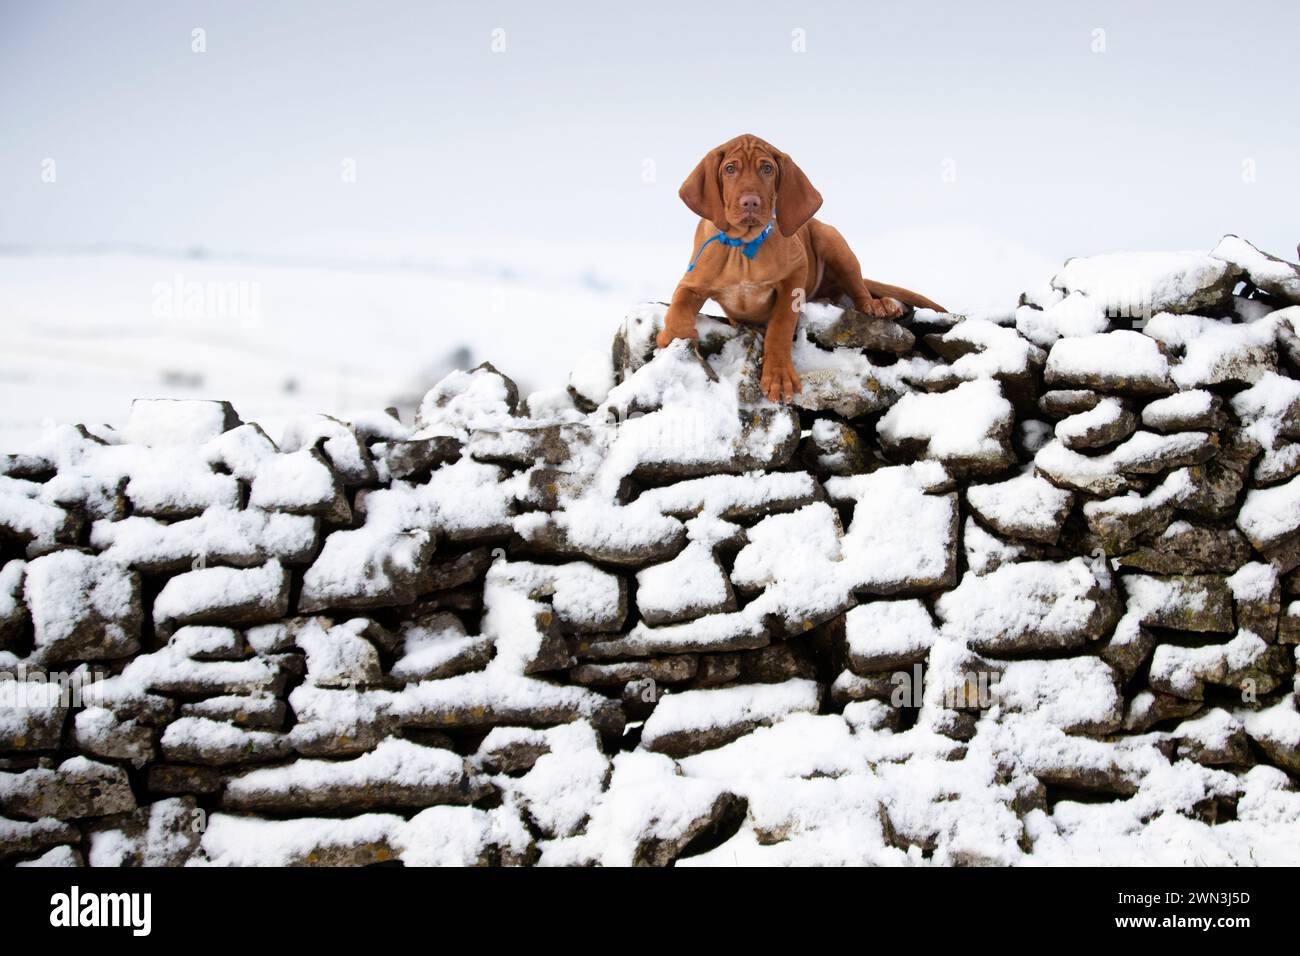 06/12/21   After an unexpected afternoon snow shower, 13-week-old Hungarian Vizsla puppy Moreton, plays in the snow for the first time and discovers h Stock Photo